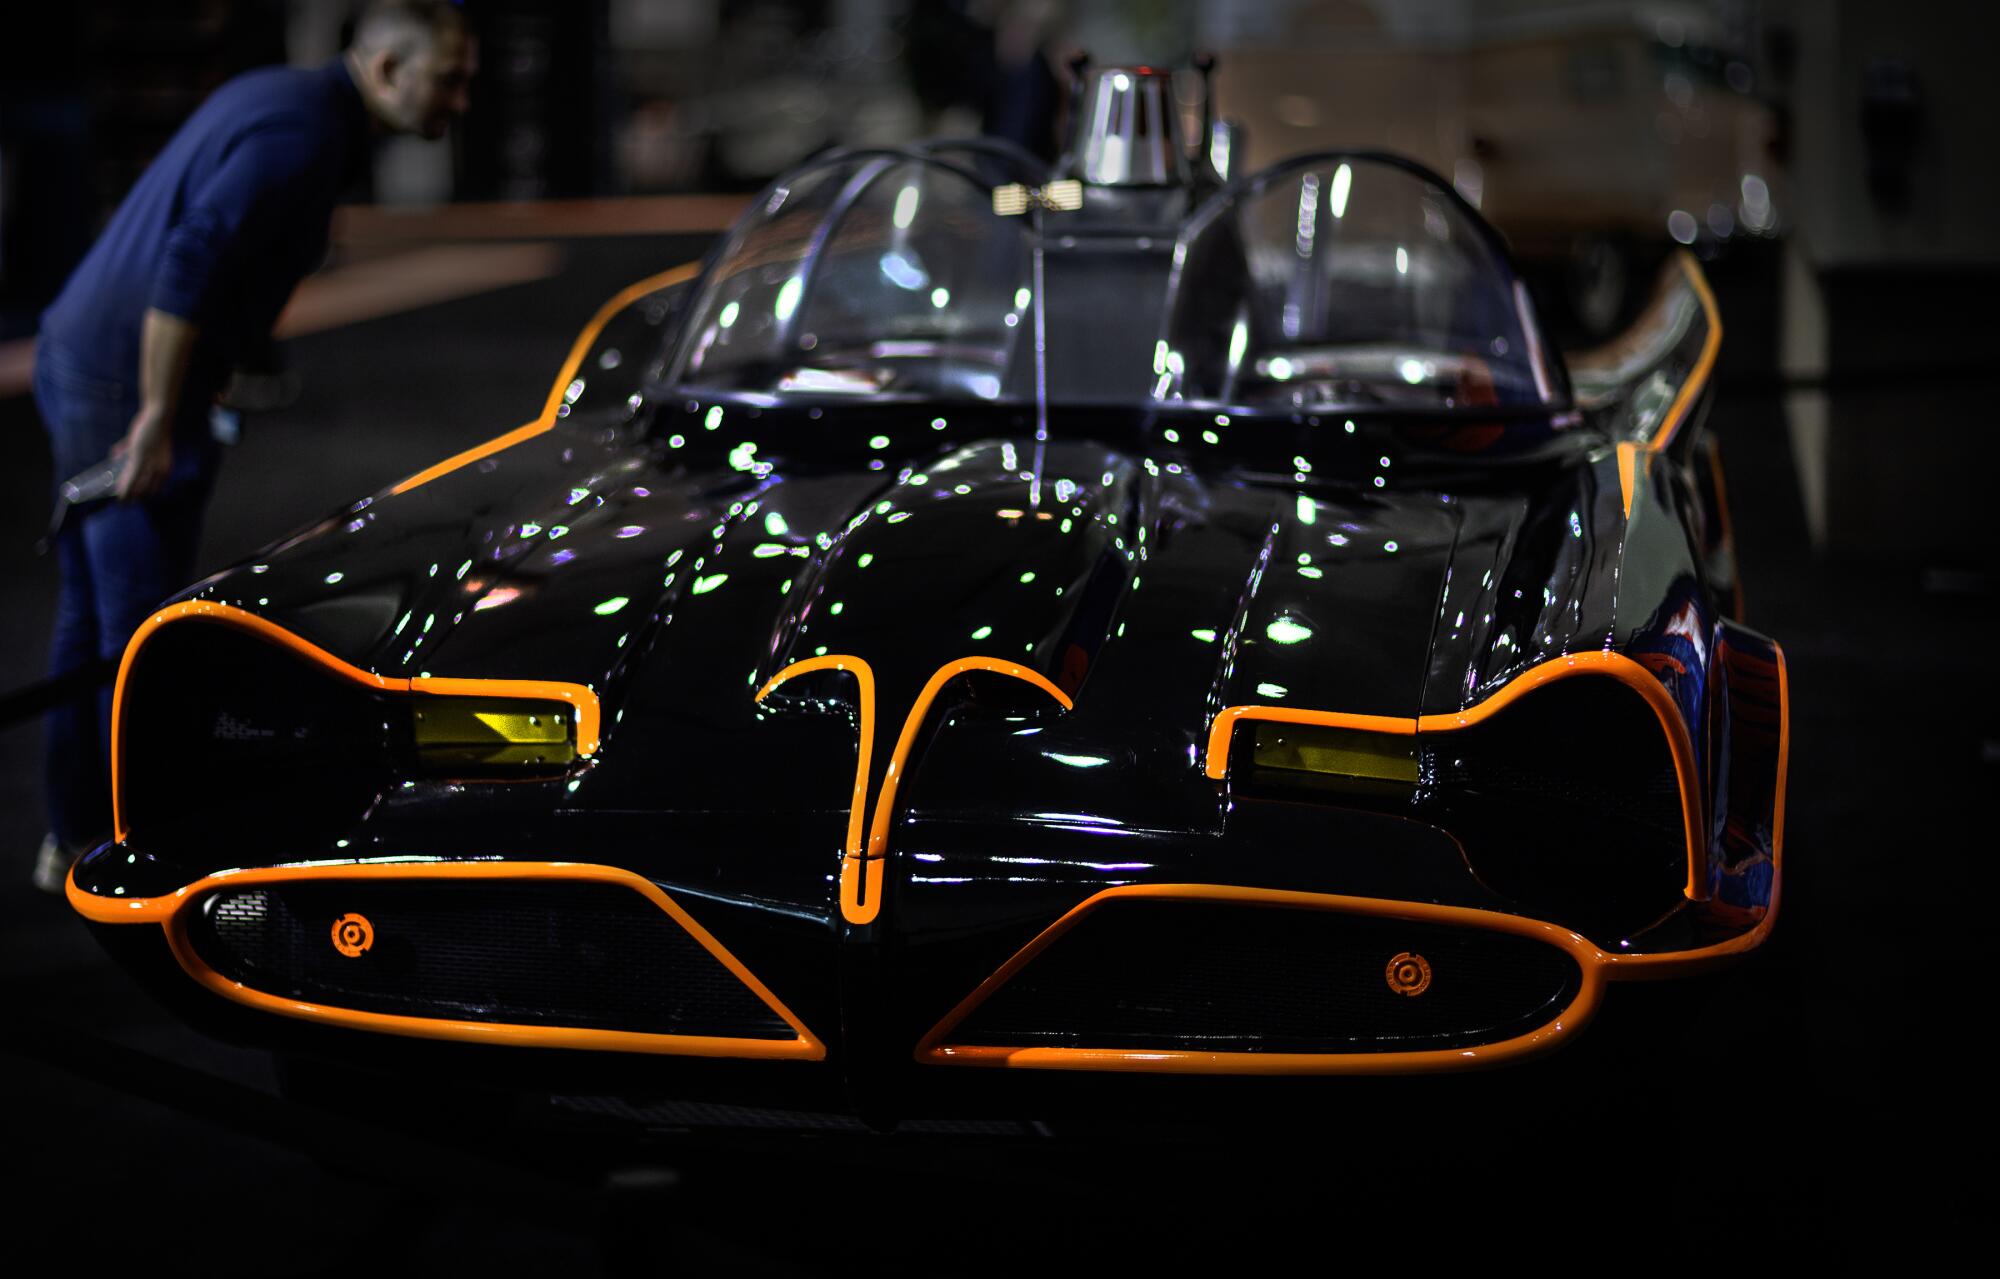 The Batmobile, which started life as a Ford Lincoln Futura, on display at the L.A. Auto Show.